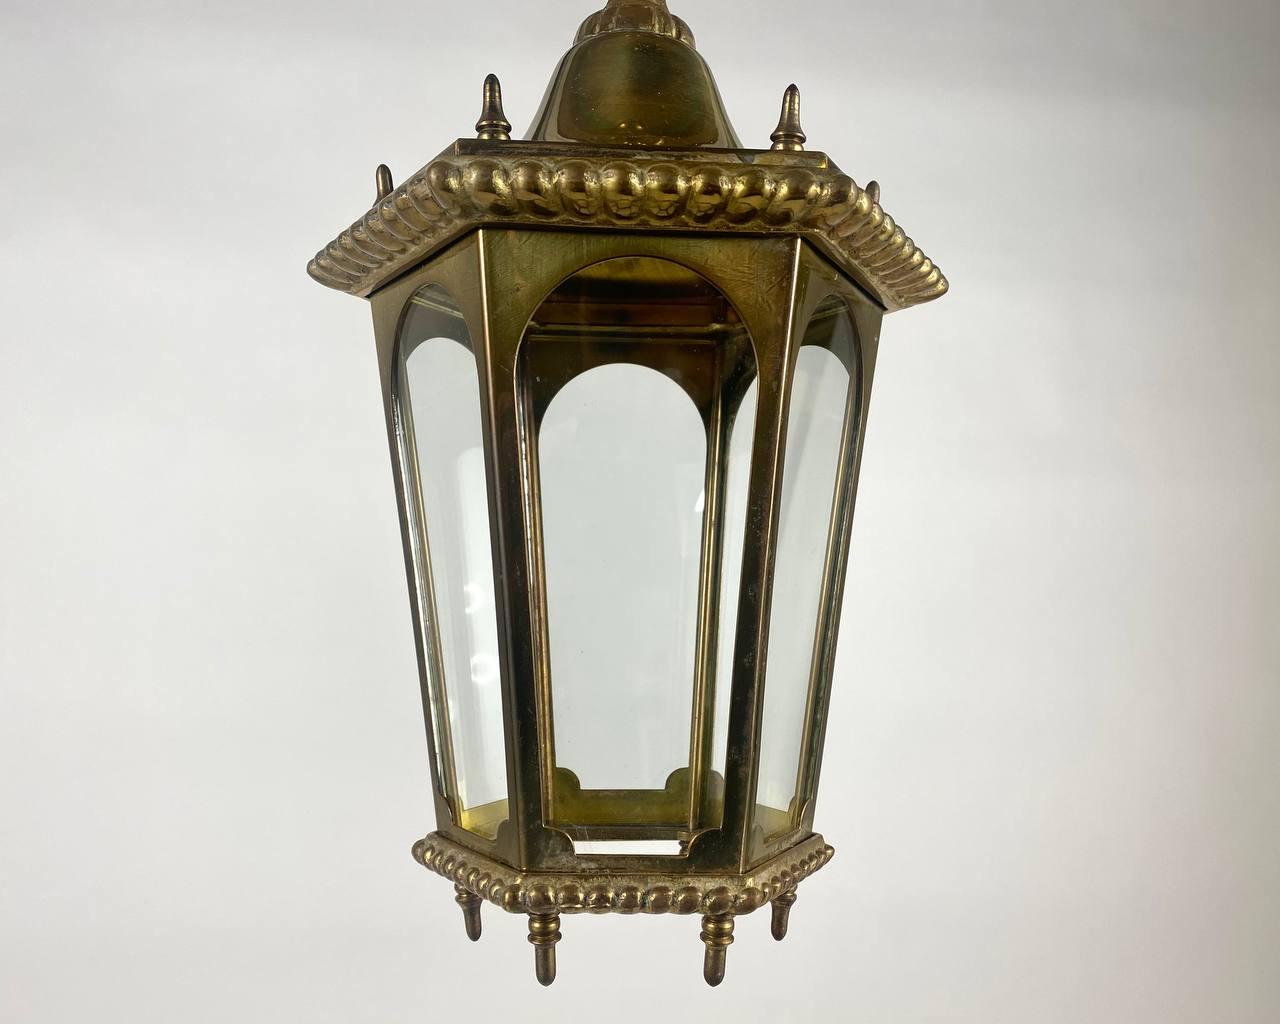 Small vintage 6 sided bronze and glass ceiling lantern. 

Very beautiful decorative bronze lantern-chandelier with six glass panels. The gold paint on the lantern looks delightful.

Decorate your ceiling with Mid-20th Century lantern.

This